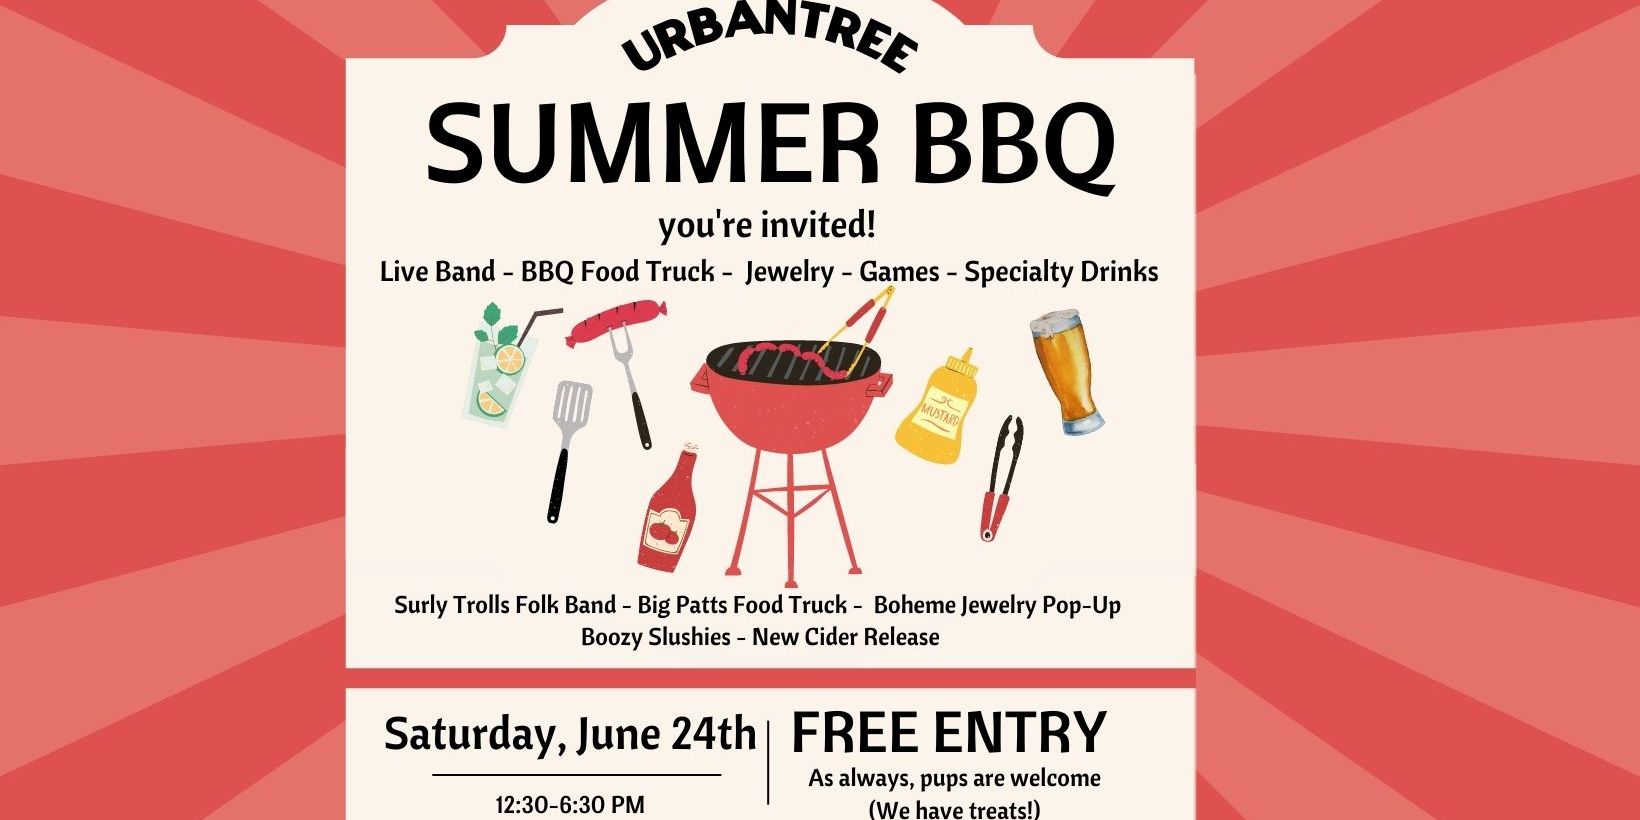 UrbanTree Cidery's Summer BBQ promotional image